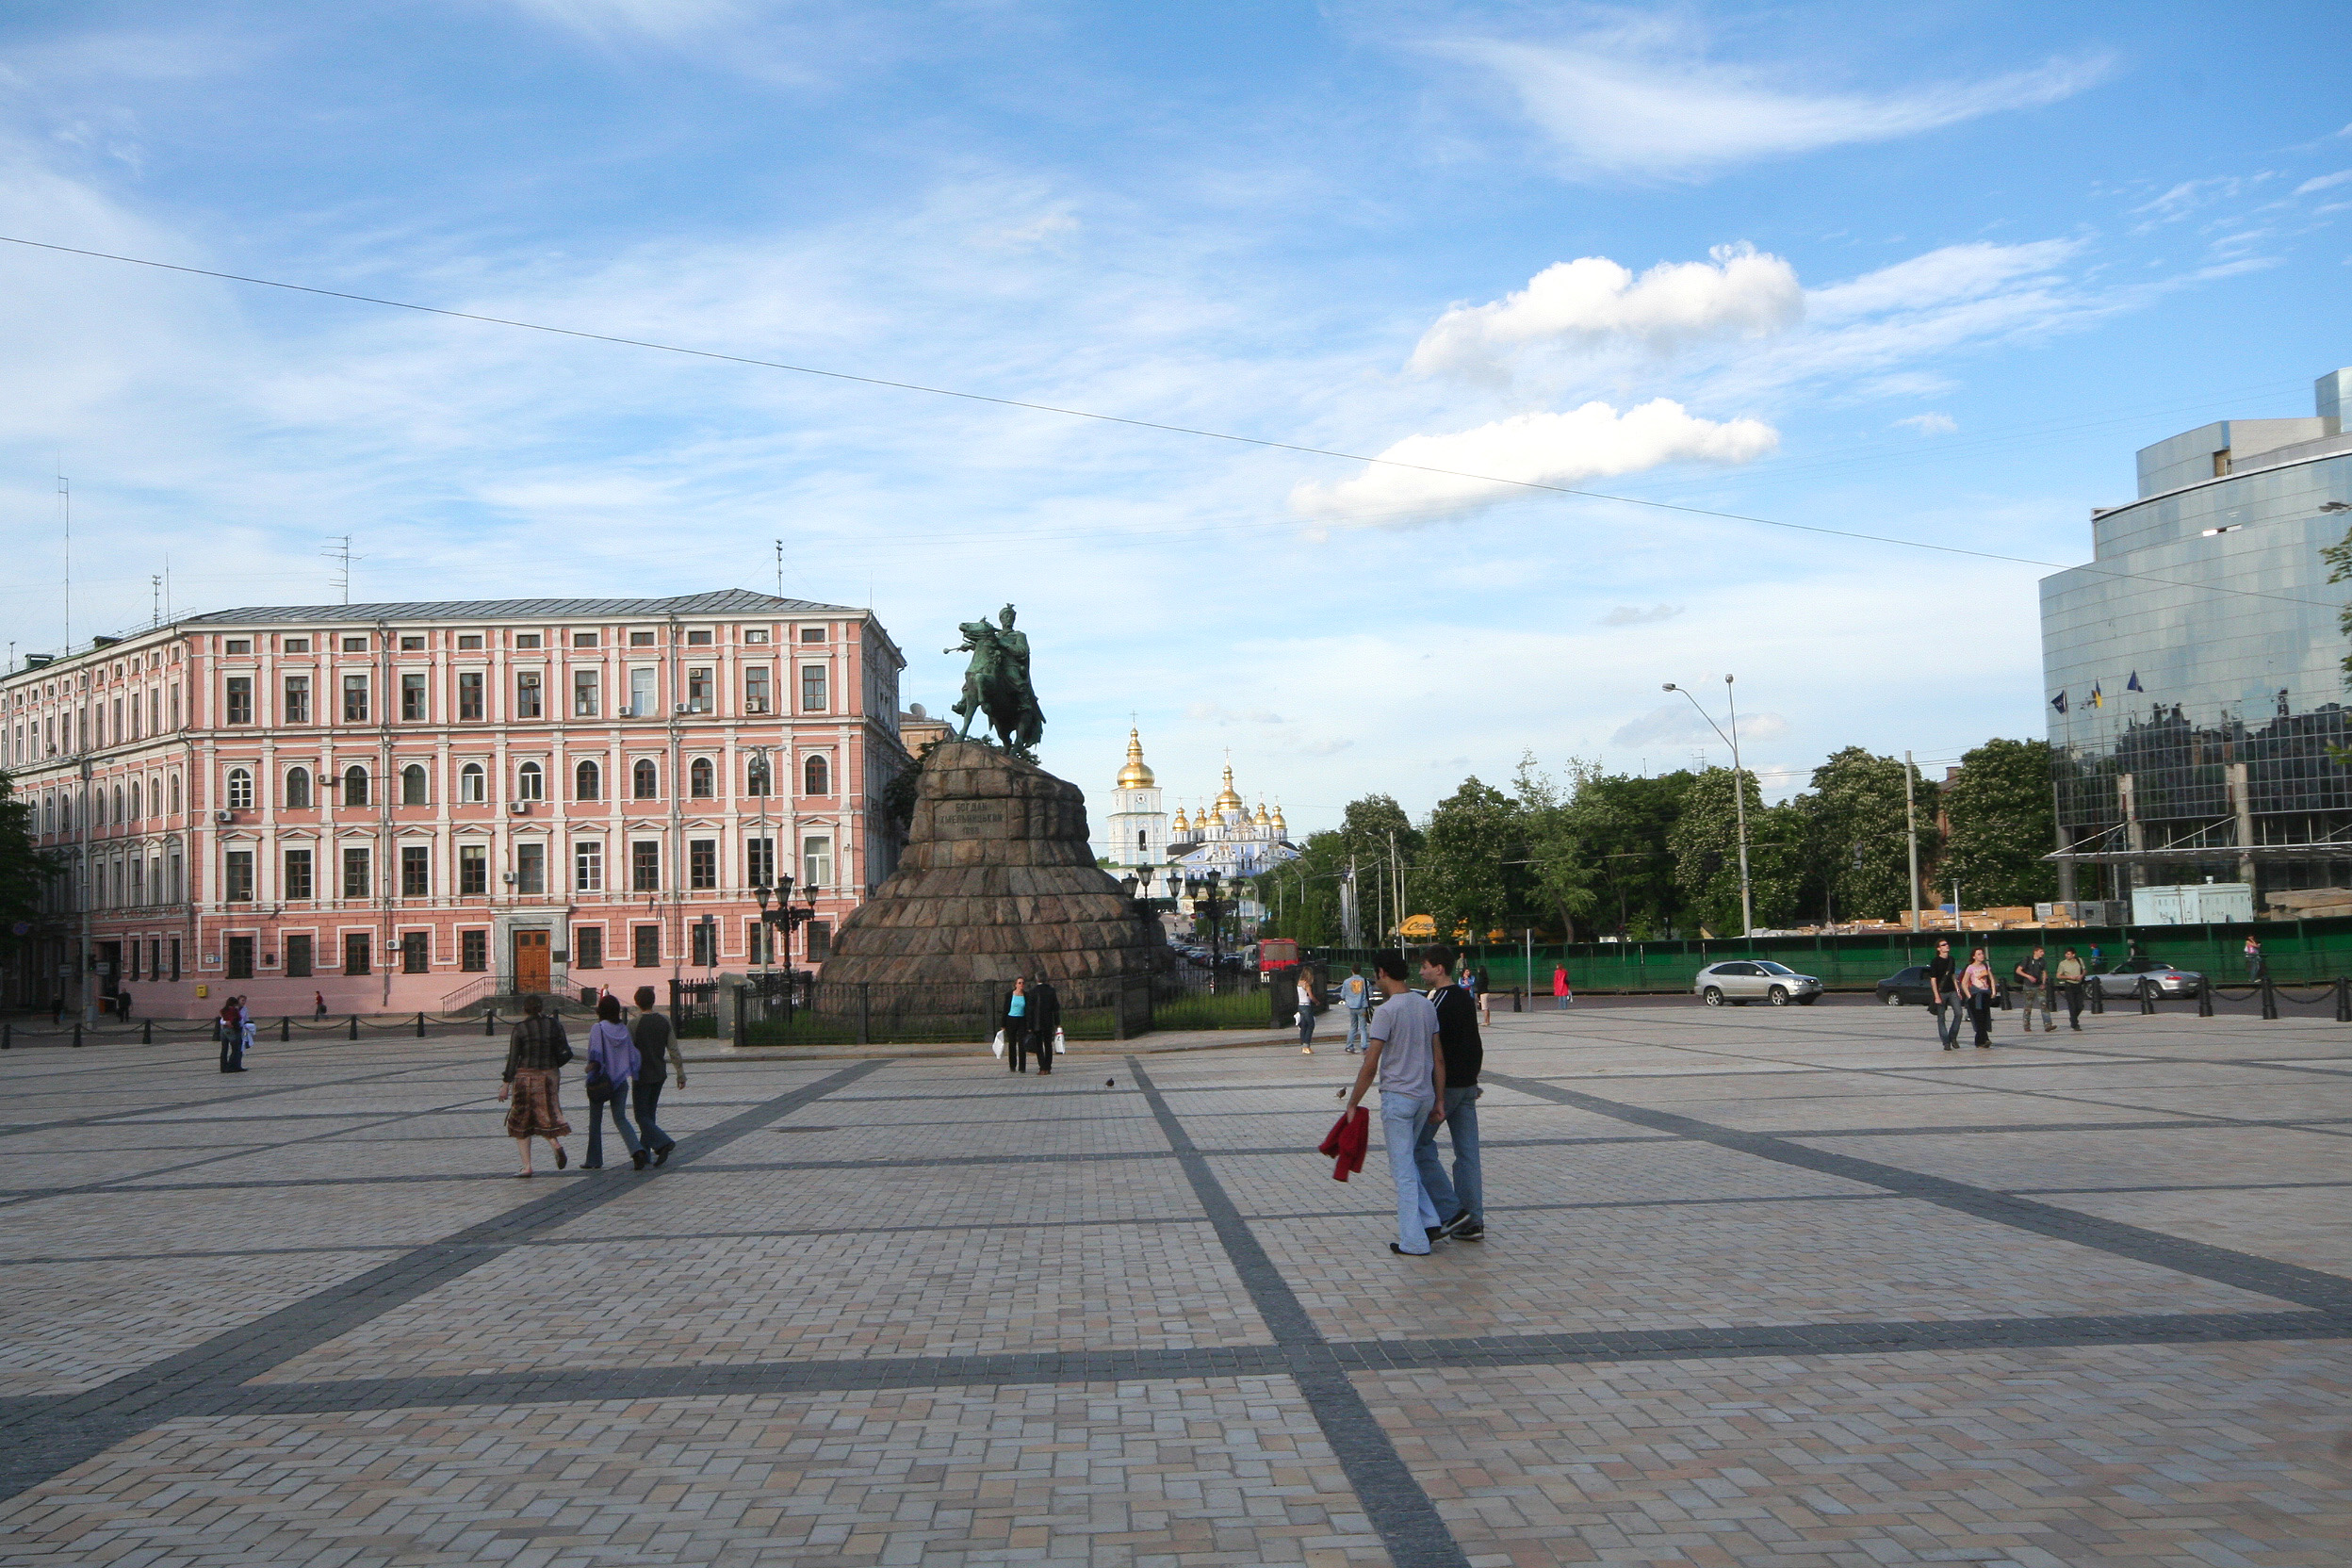 Another view of the statue in Bogdan Khmelnitsky Square.